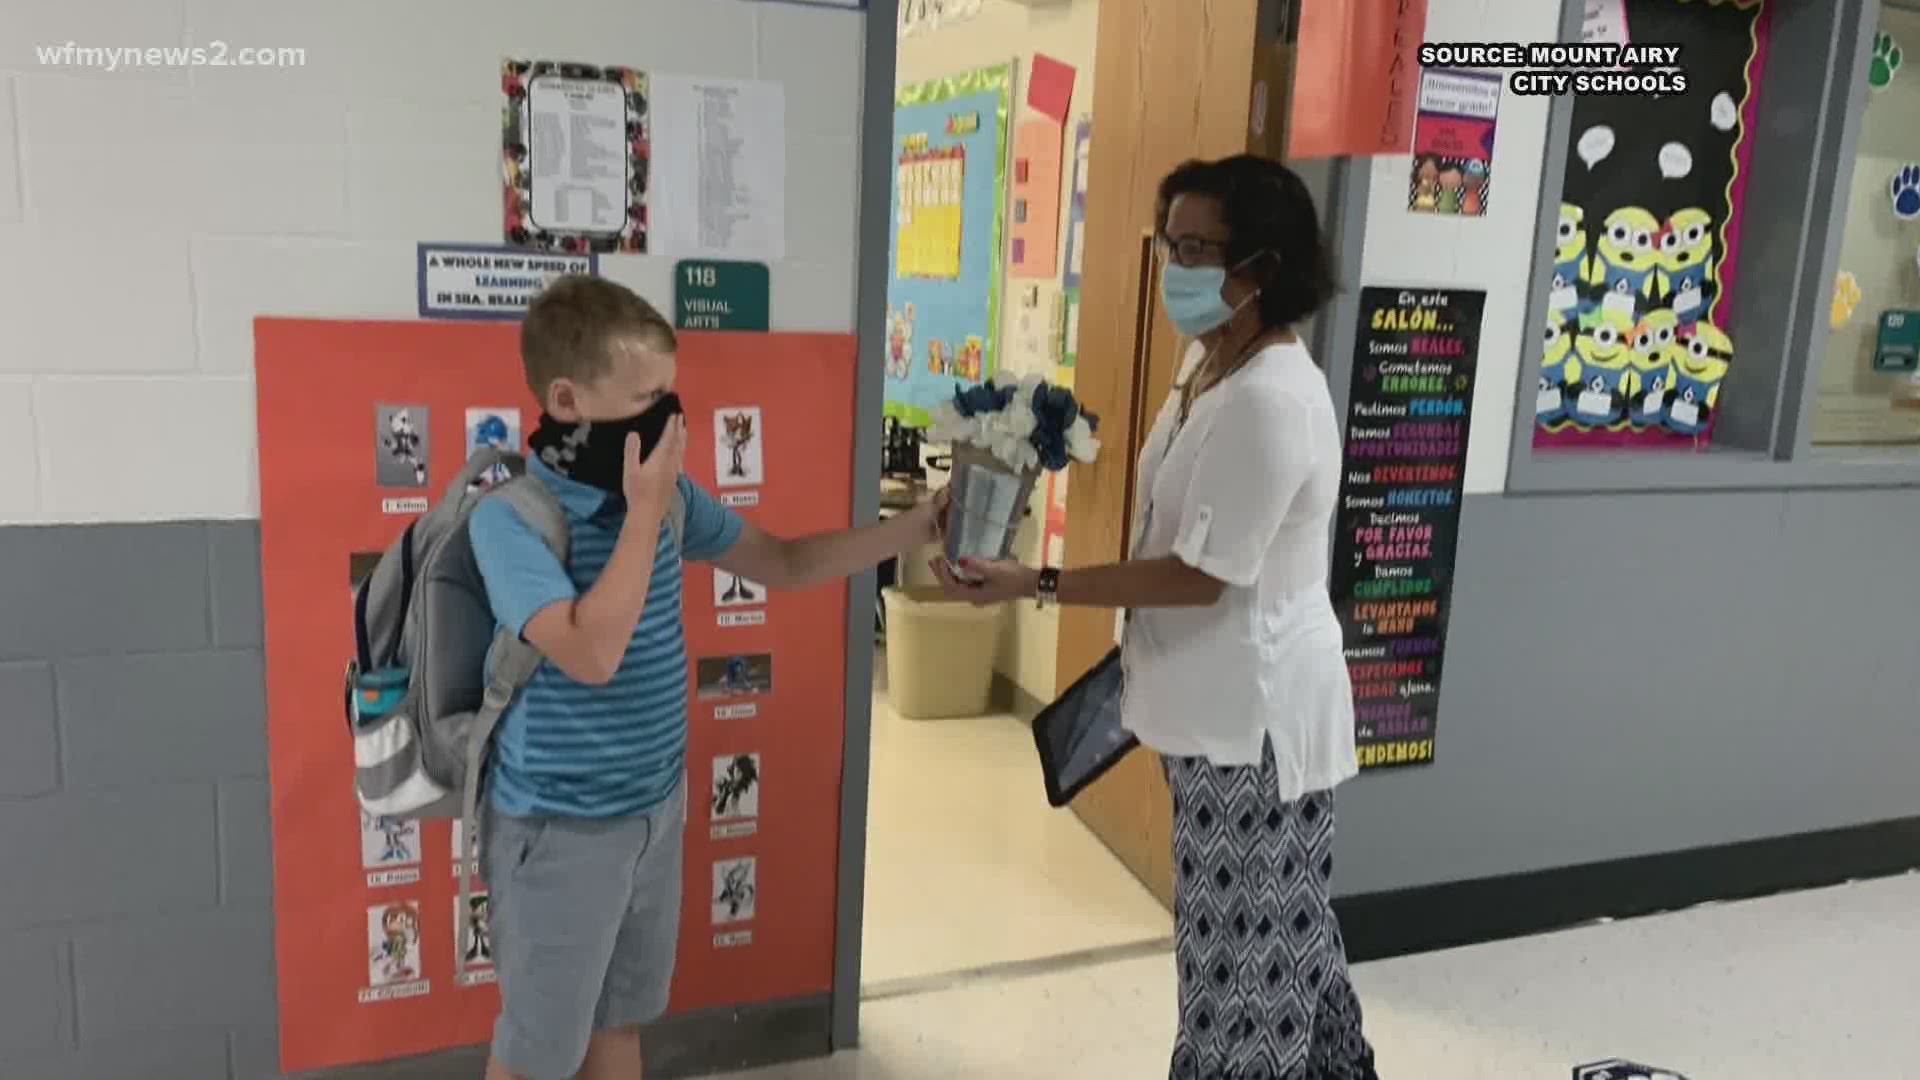 Mt. Airy schools is one of three Triad school districts starting the year with in-person learning. More than 1,200 kids returned to buildings Monday.